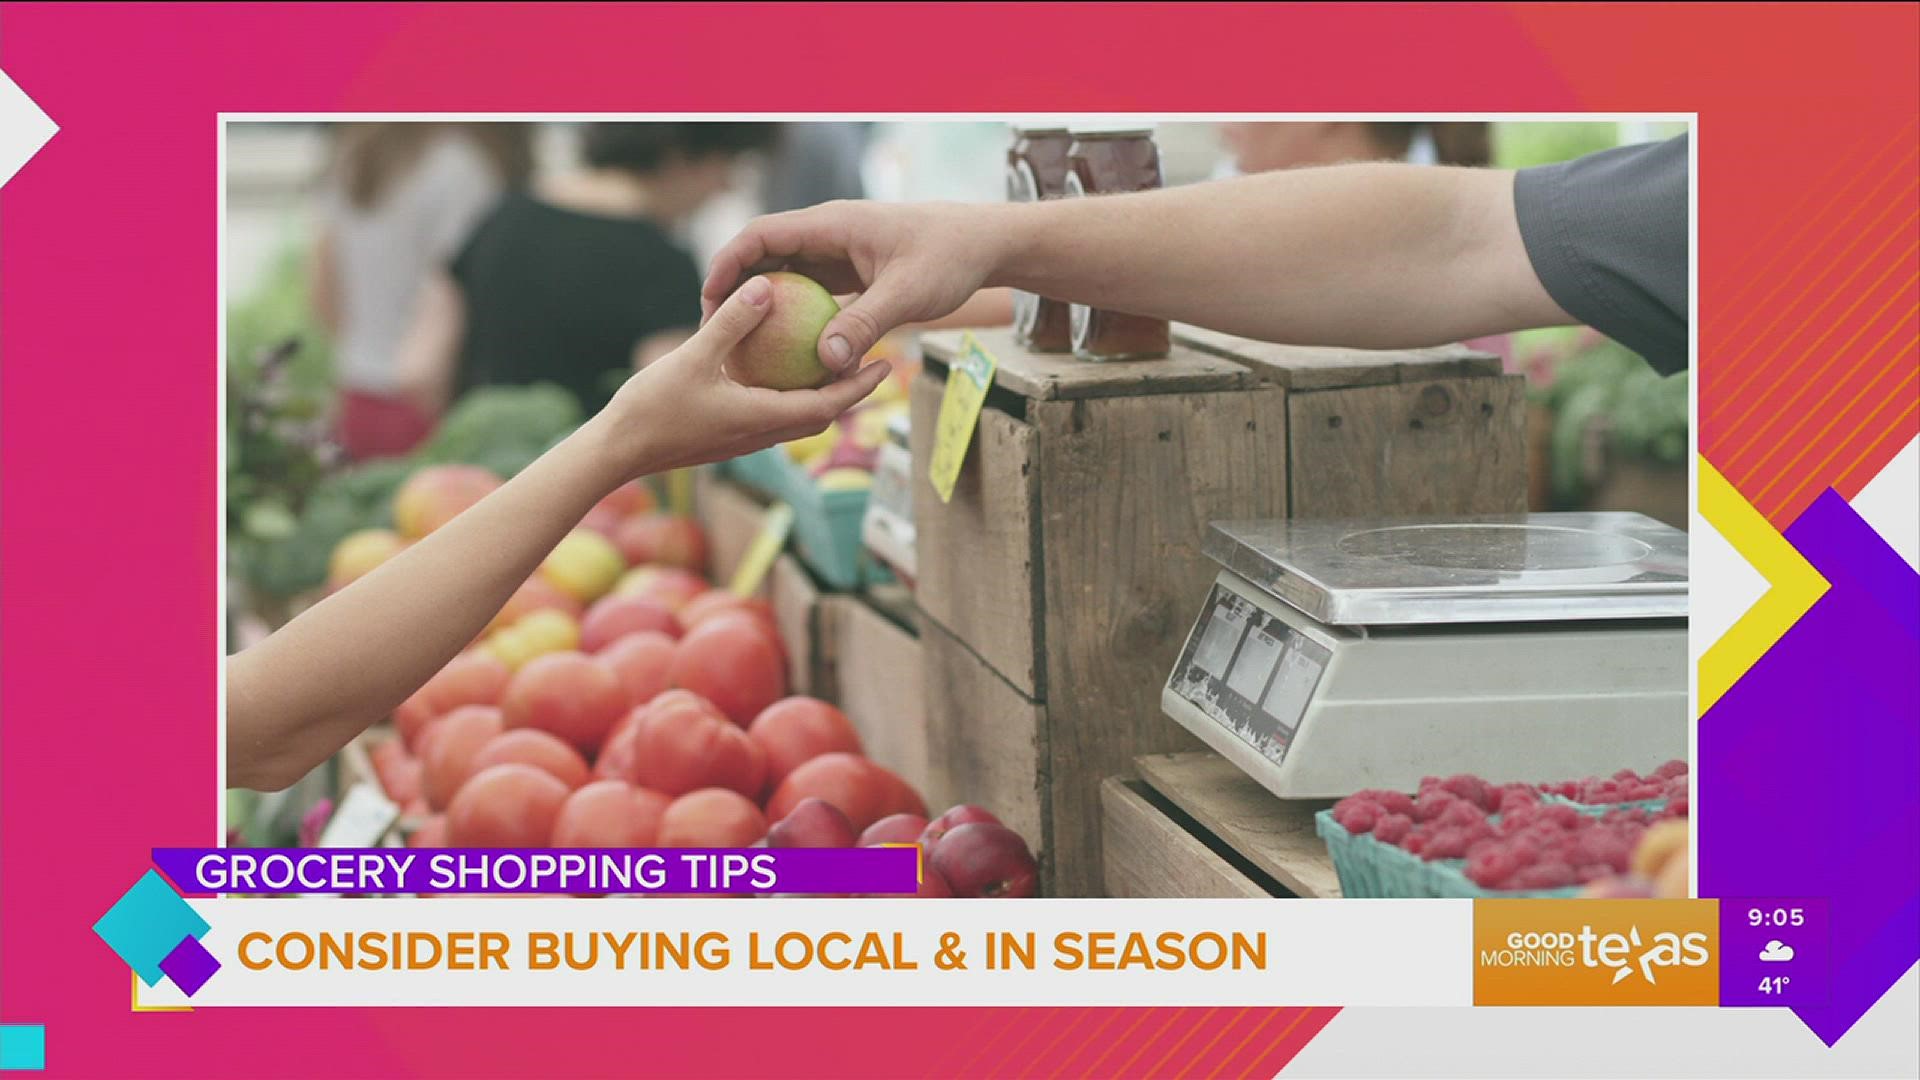 Save money! We share money-saving tips you can use during your next trip to the grocery store.